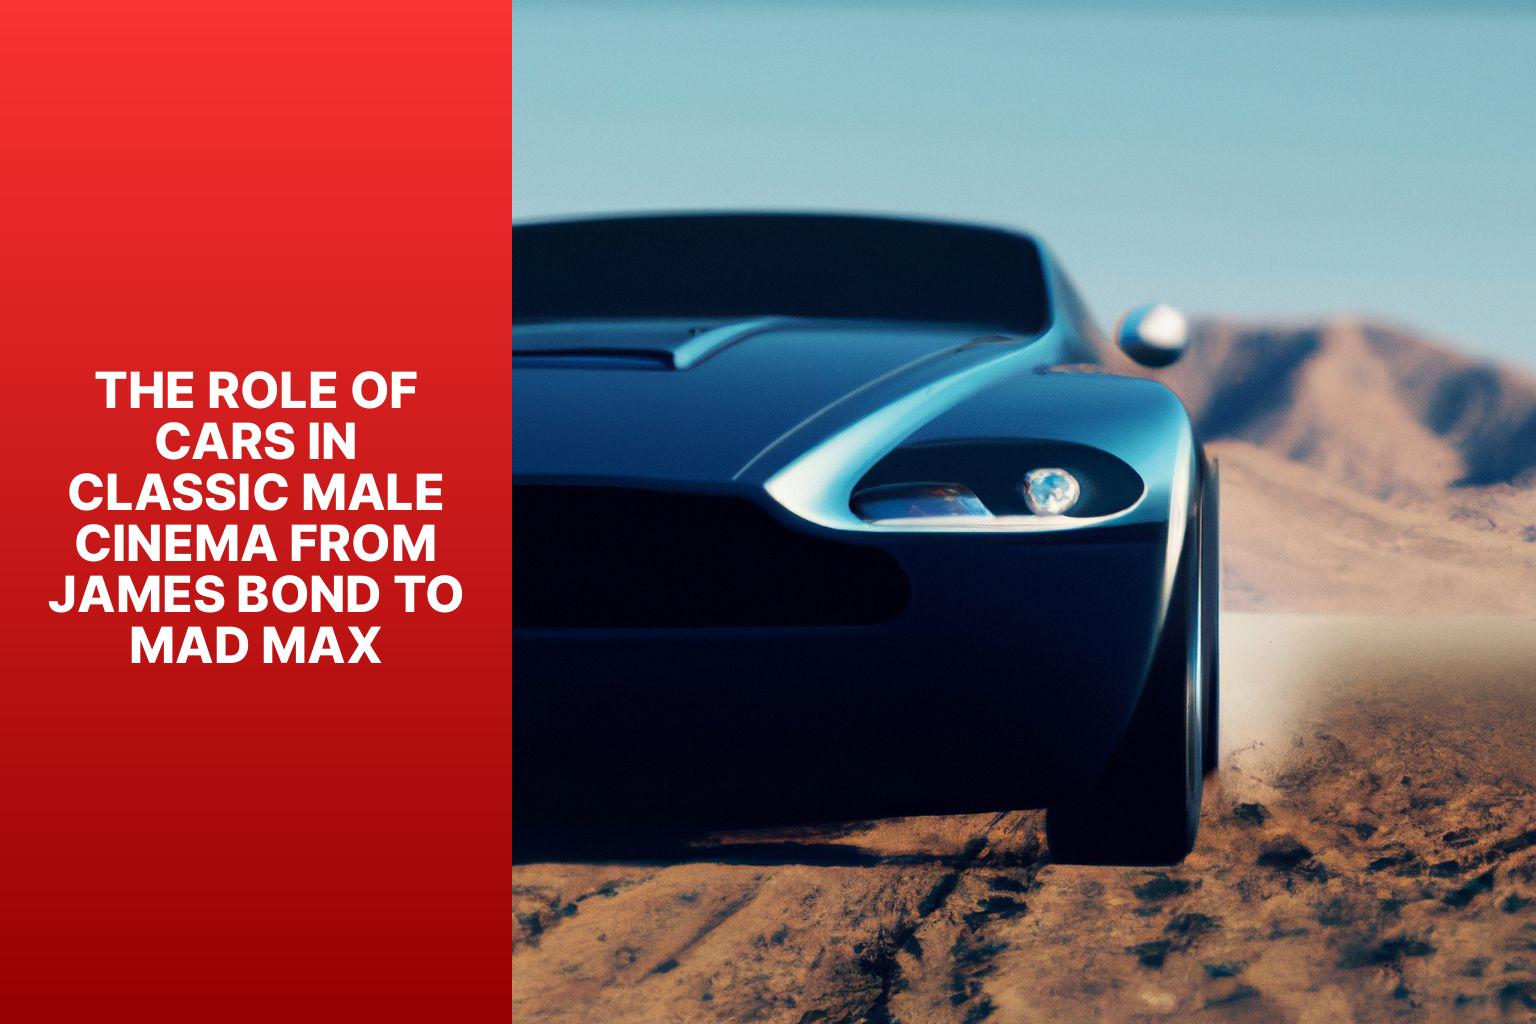 The Role of Cars in Classic Male Cinema: From James Bond to Mad Max